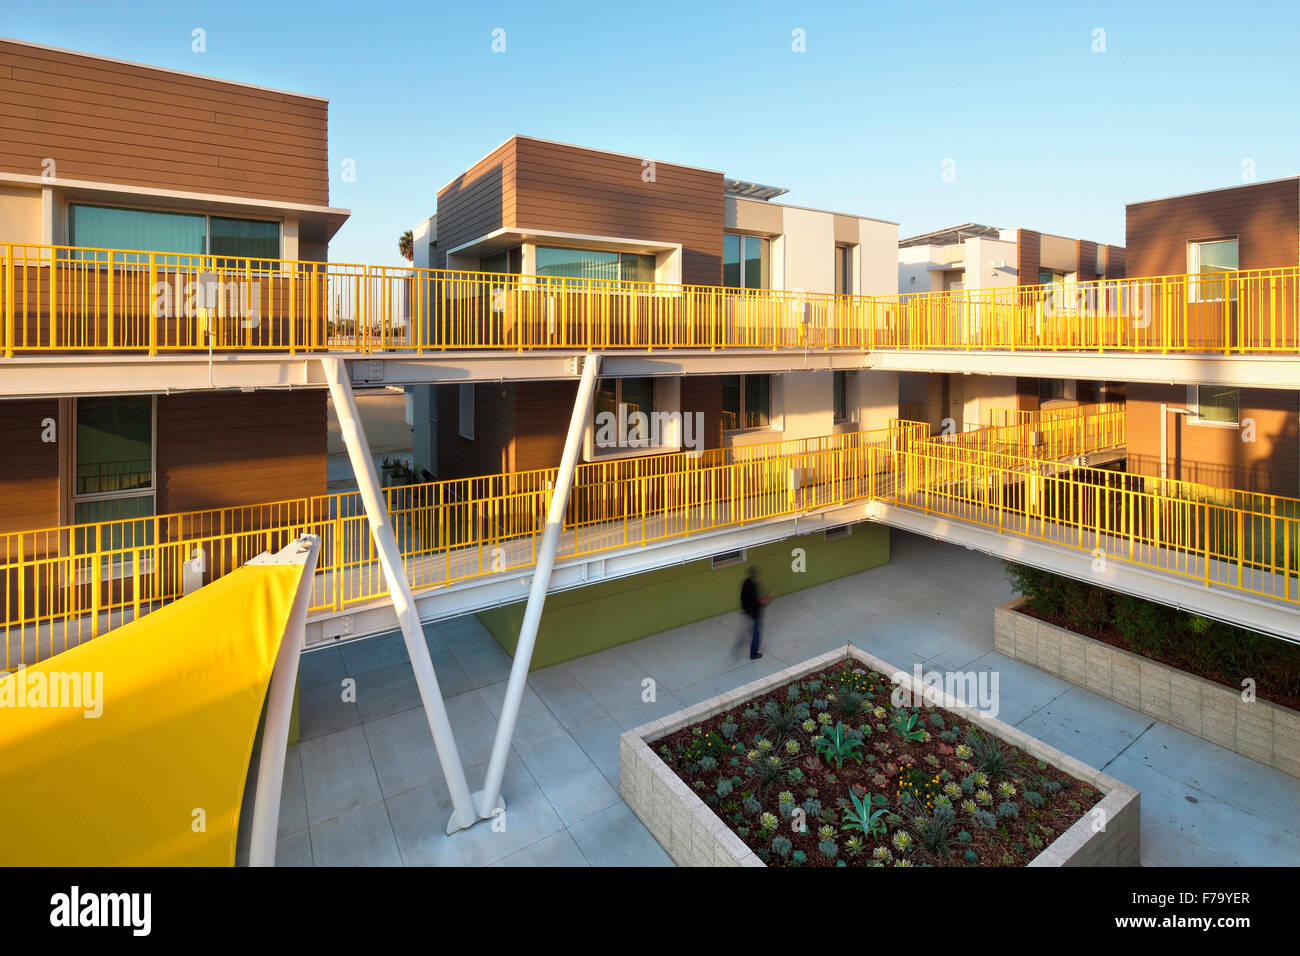 Interior courtyard at High Place West Affordable Homes, Santa Monica, CA by Kanner Architects and CCSM Stock Photo